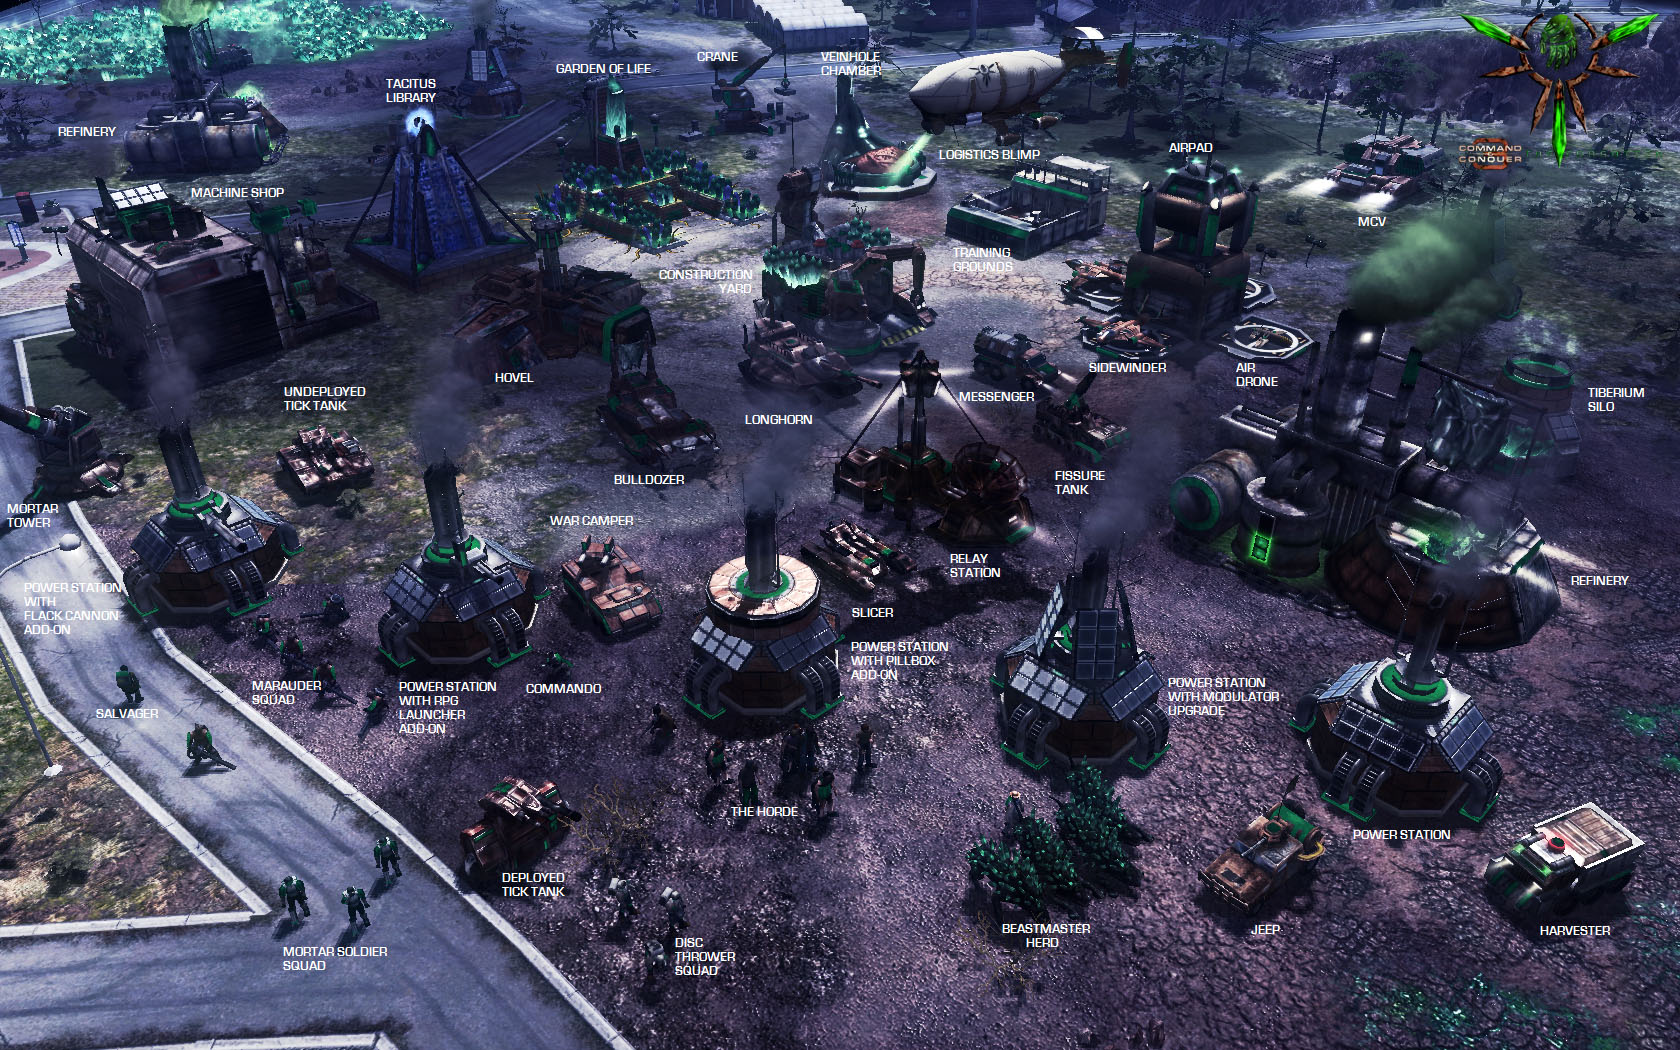 T me rts scan. Command Conquer 2 Tiberium Wars. Command & Conquer 3: Tiberium Wars. Command Conquer 3 Tiberium Twilight. Command Conquer 4 Tiberium Wars.